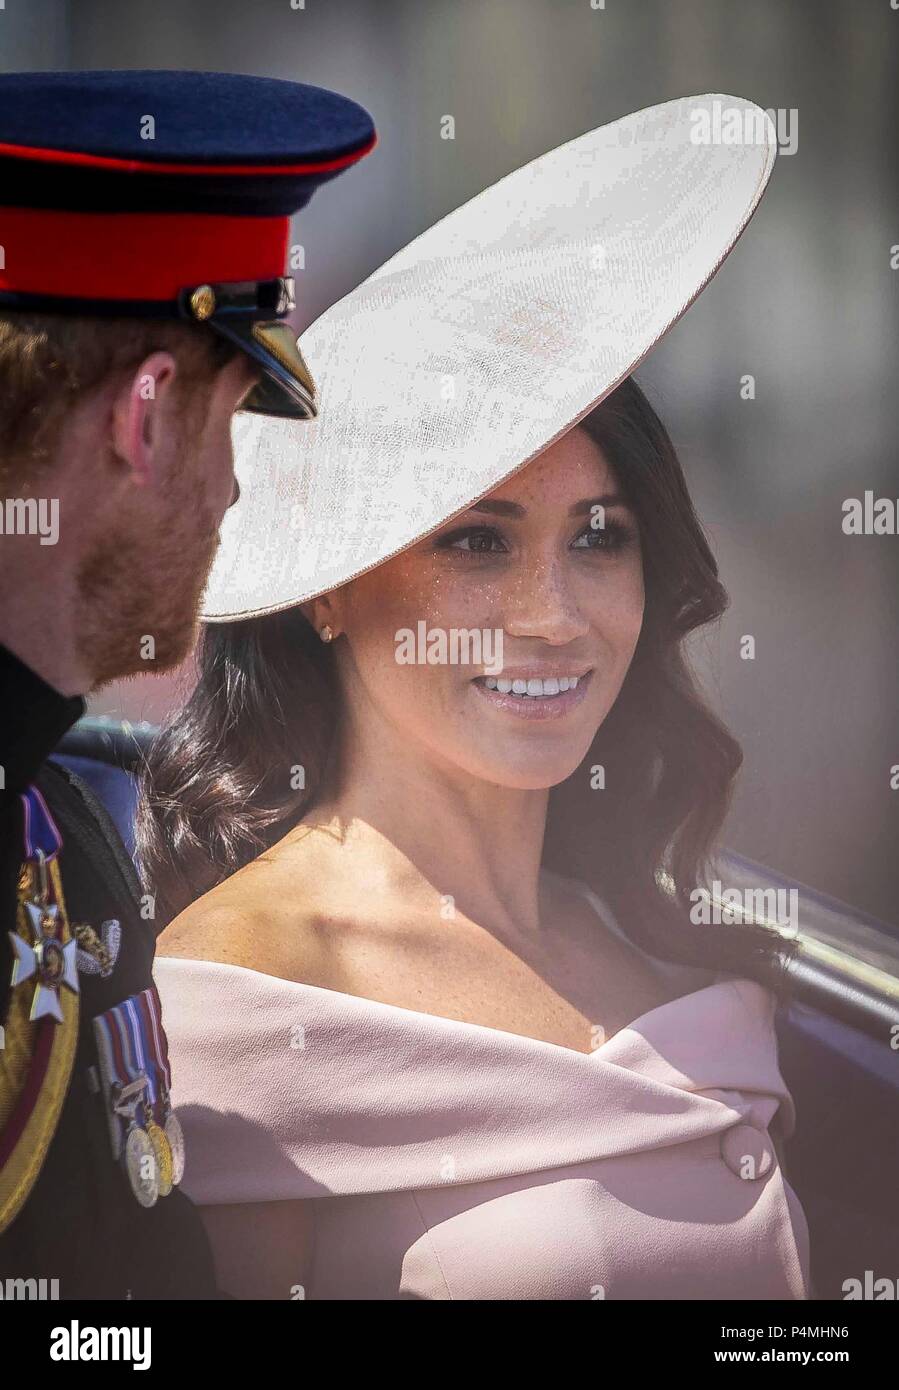 Prince Harry, Duke of Sussex, Meghan, Duchess of Sussex, take part in the carriage procession down the Mall during the annual Trooping The Colour parade.on June 19, 2018 in London, England. Trooping the Colour is a military parade to mark Queen Elizabeth II's official birthday and dates back to the time of Charles II in the 17th Century when the Colours of a Regiment were used as a rallying point in battle. Stock Photo